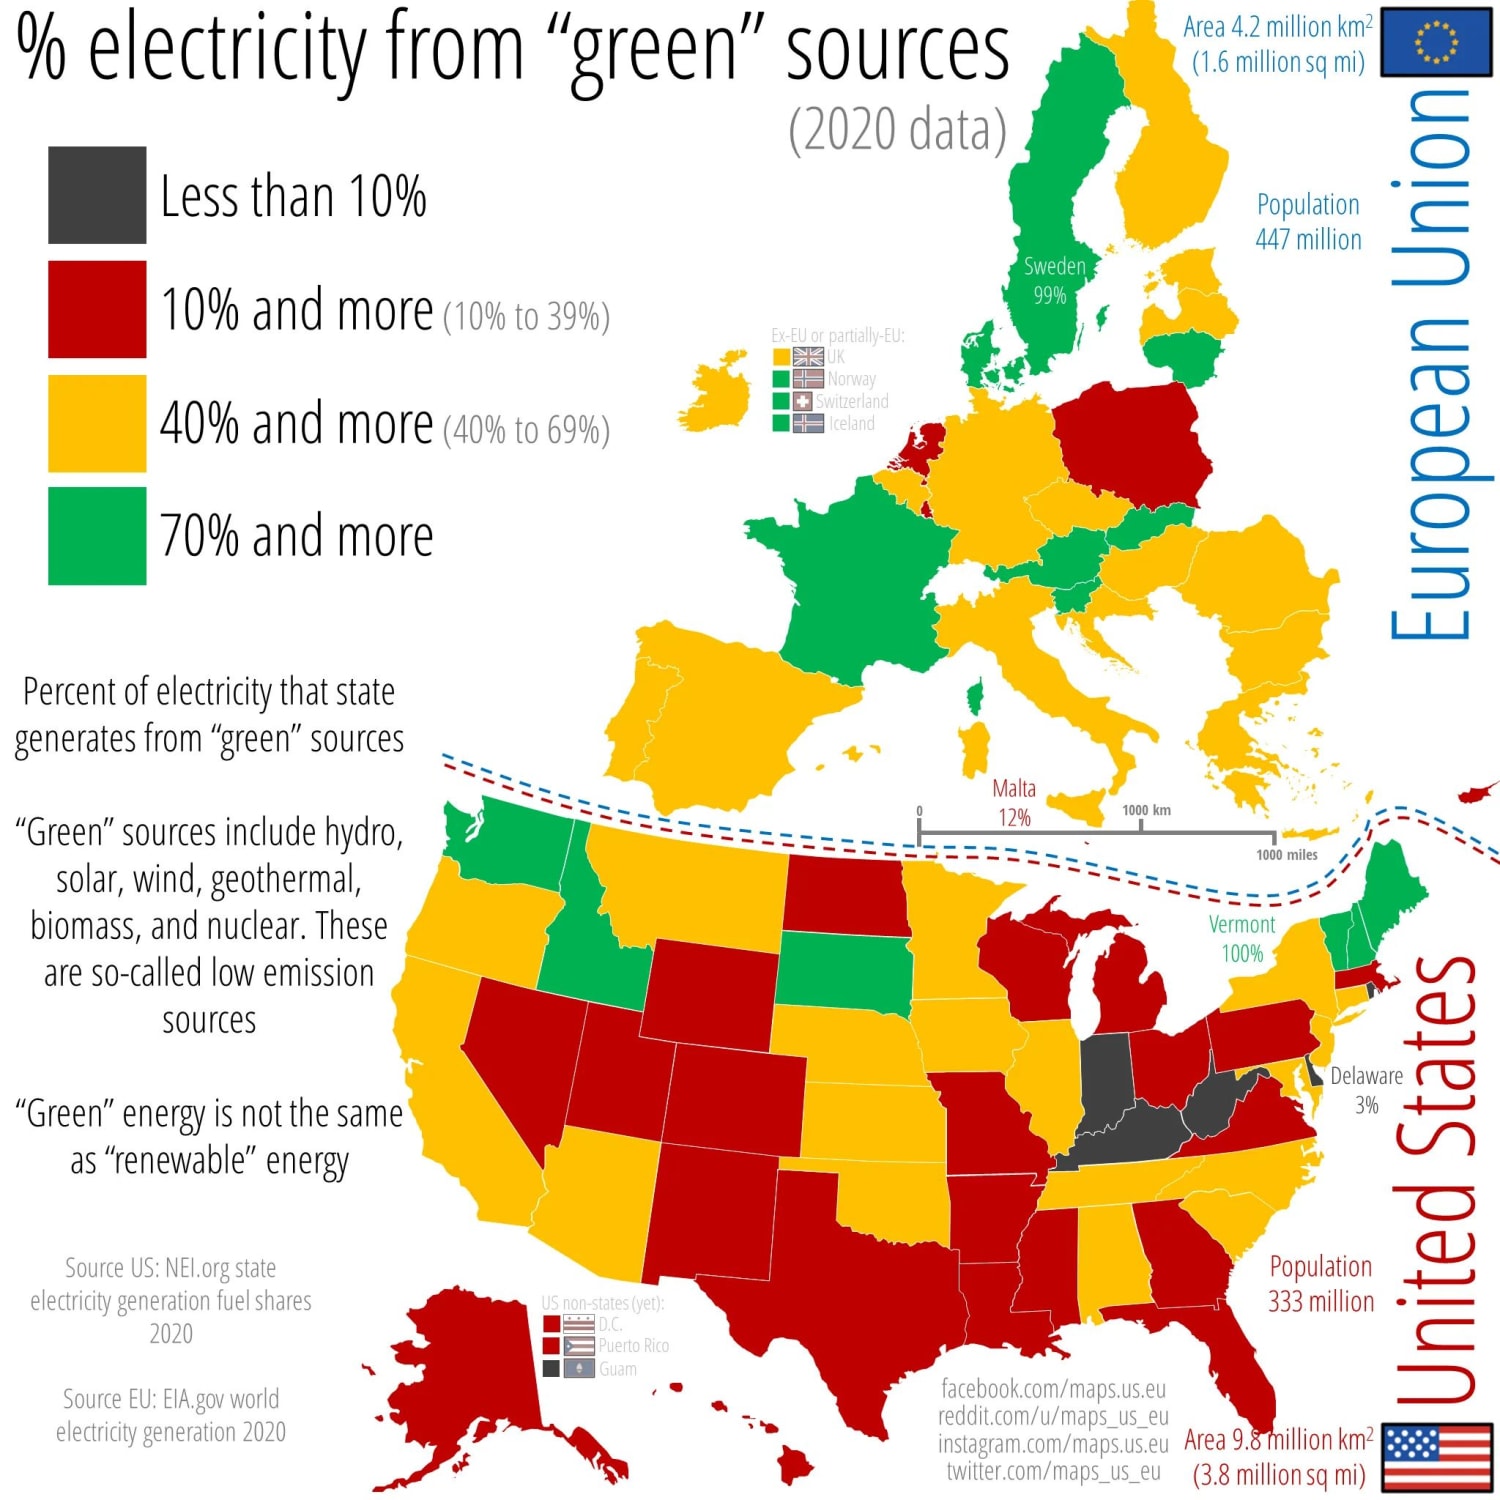 Percent of electricity that state generates from “green” sources across the US and the EU. “Green” sources include hydro, solar, wind, geothermal, biomass, and nuclear. These are so-called low emission sources. "Green” energy is not the same as “renewable” energy. 2020 data